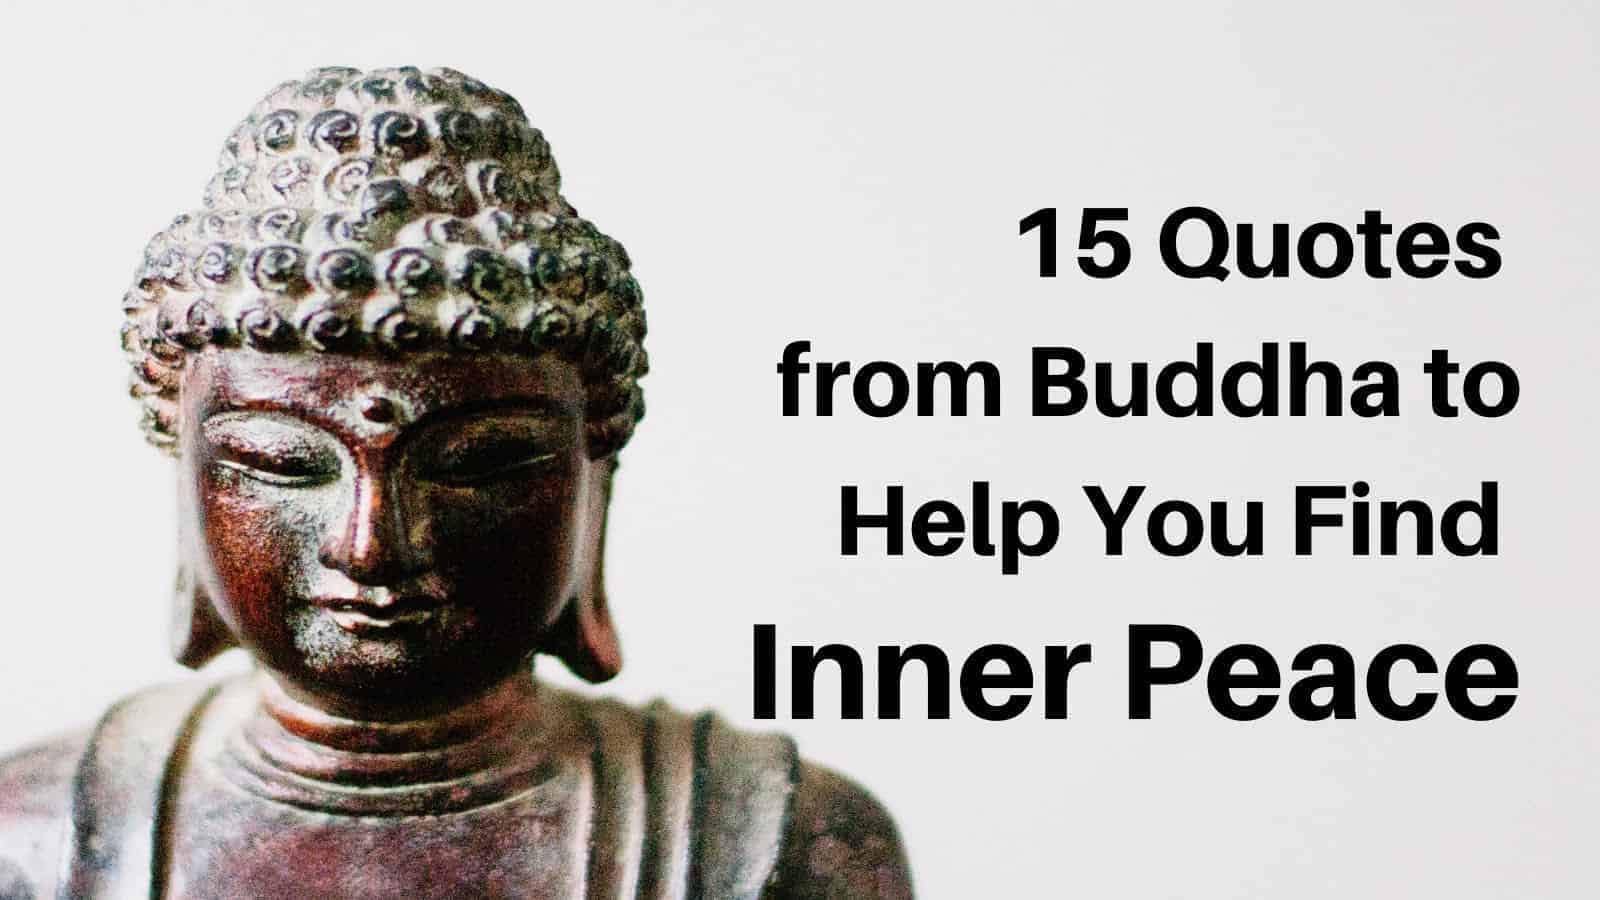 15 Quotes from Buddha to Help You Find Inner Peace